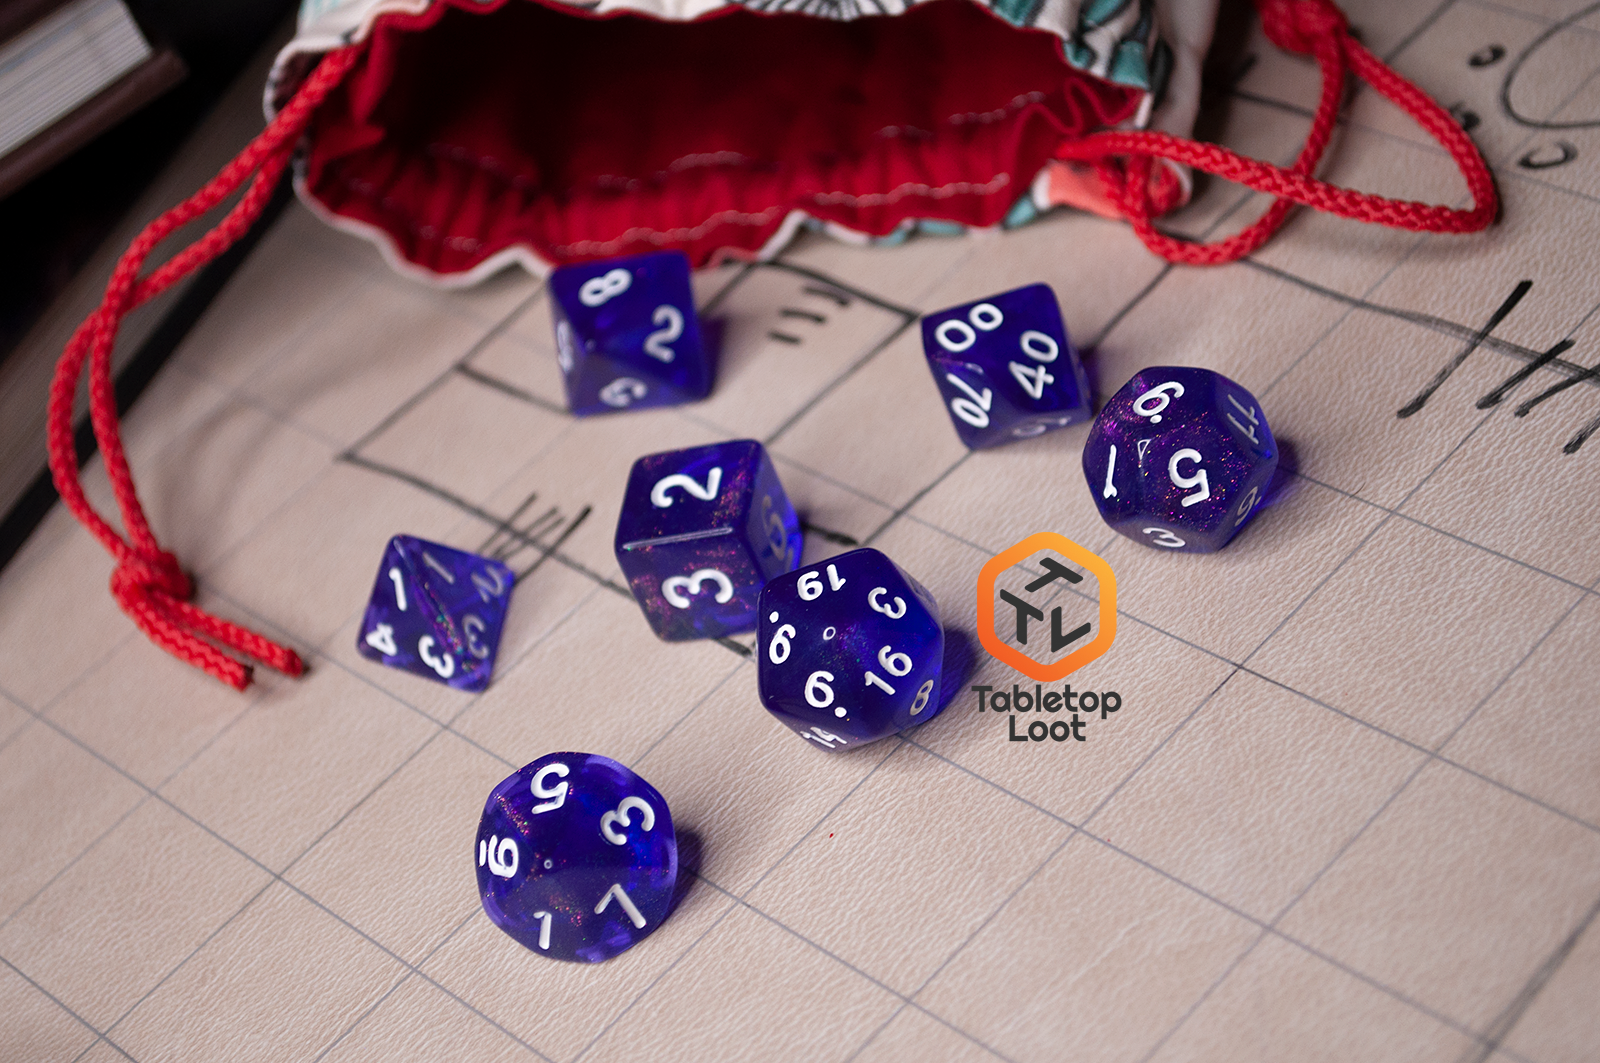 The Diamond Purple 7 piece dice set from Tabletop Loot with purple dice filled with micro glitter and white numbering.